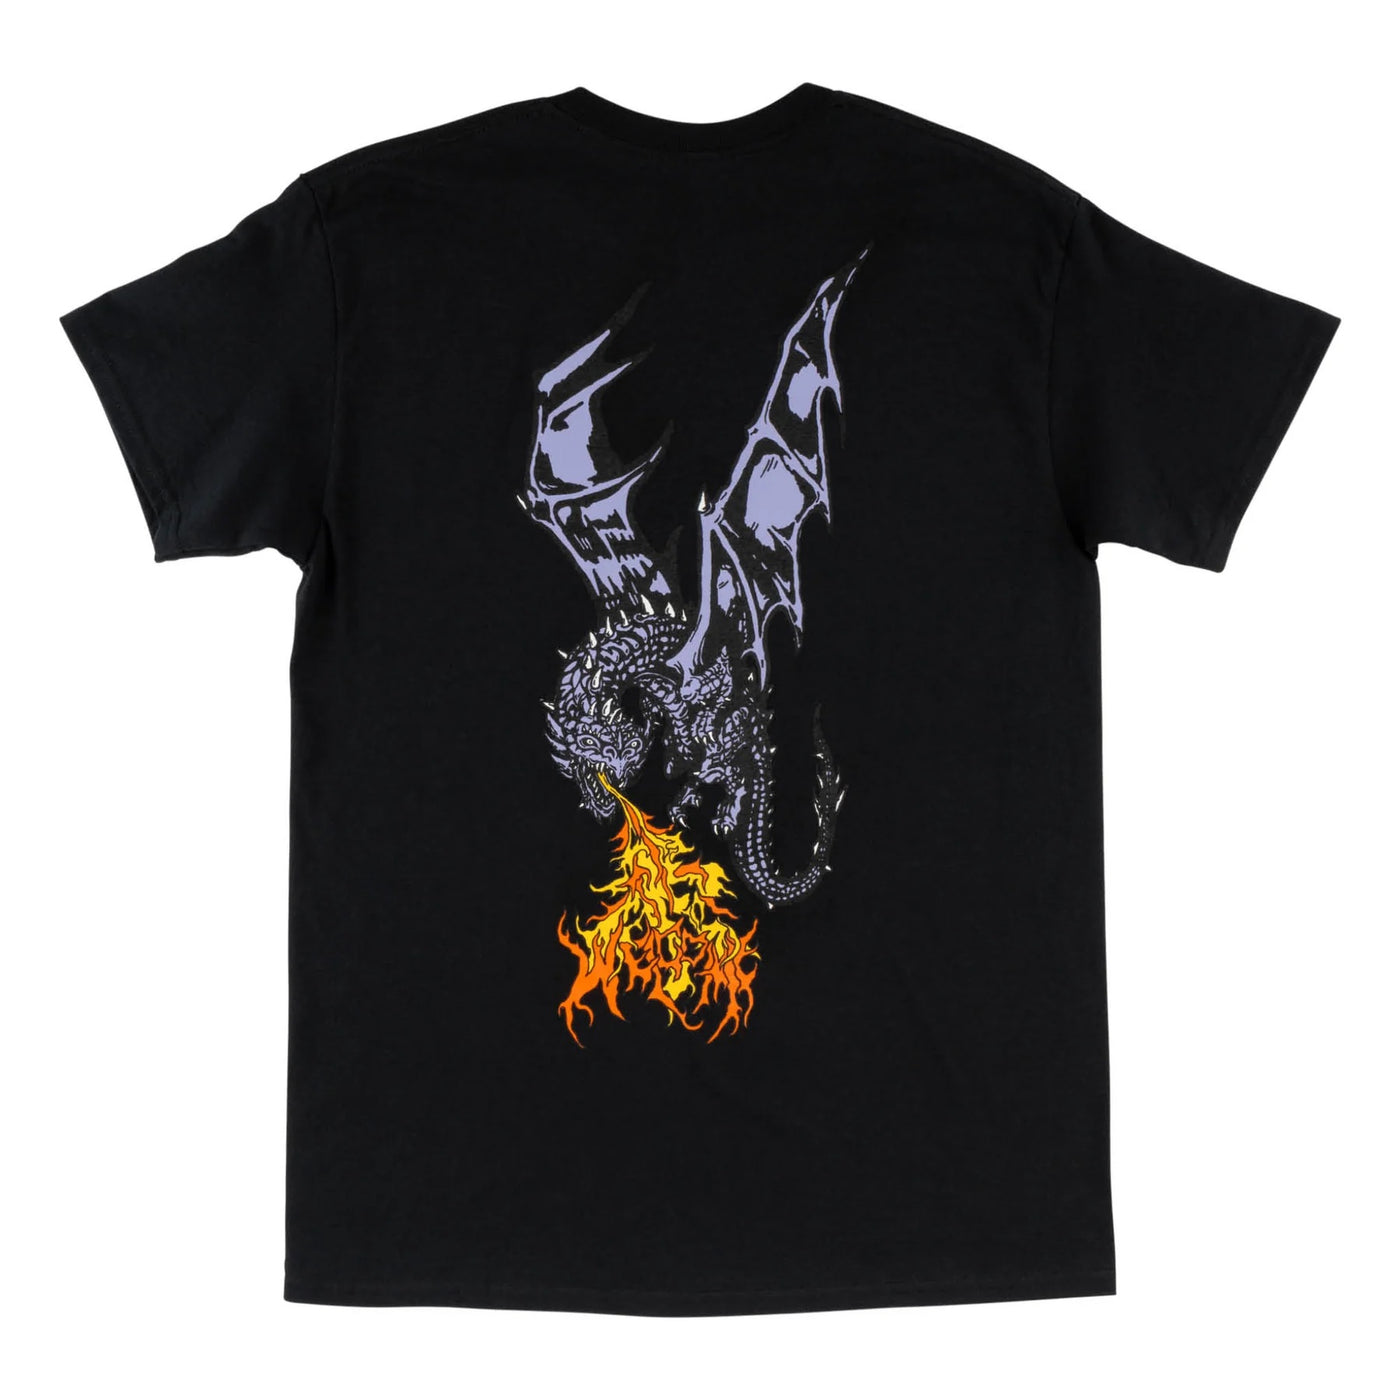 Welcome Fire Breather T-Shirt - Black